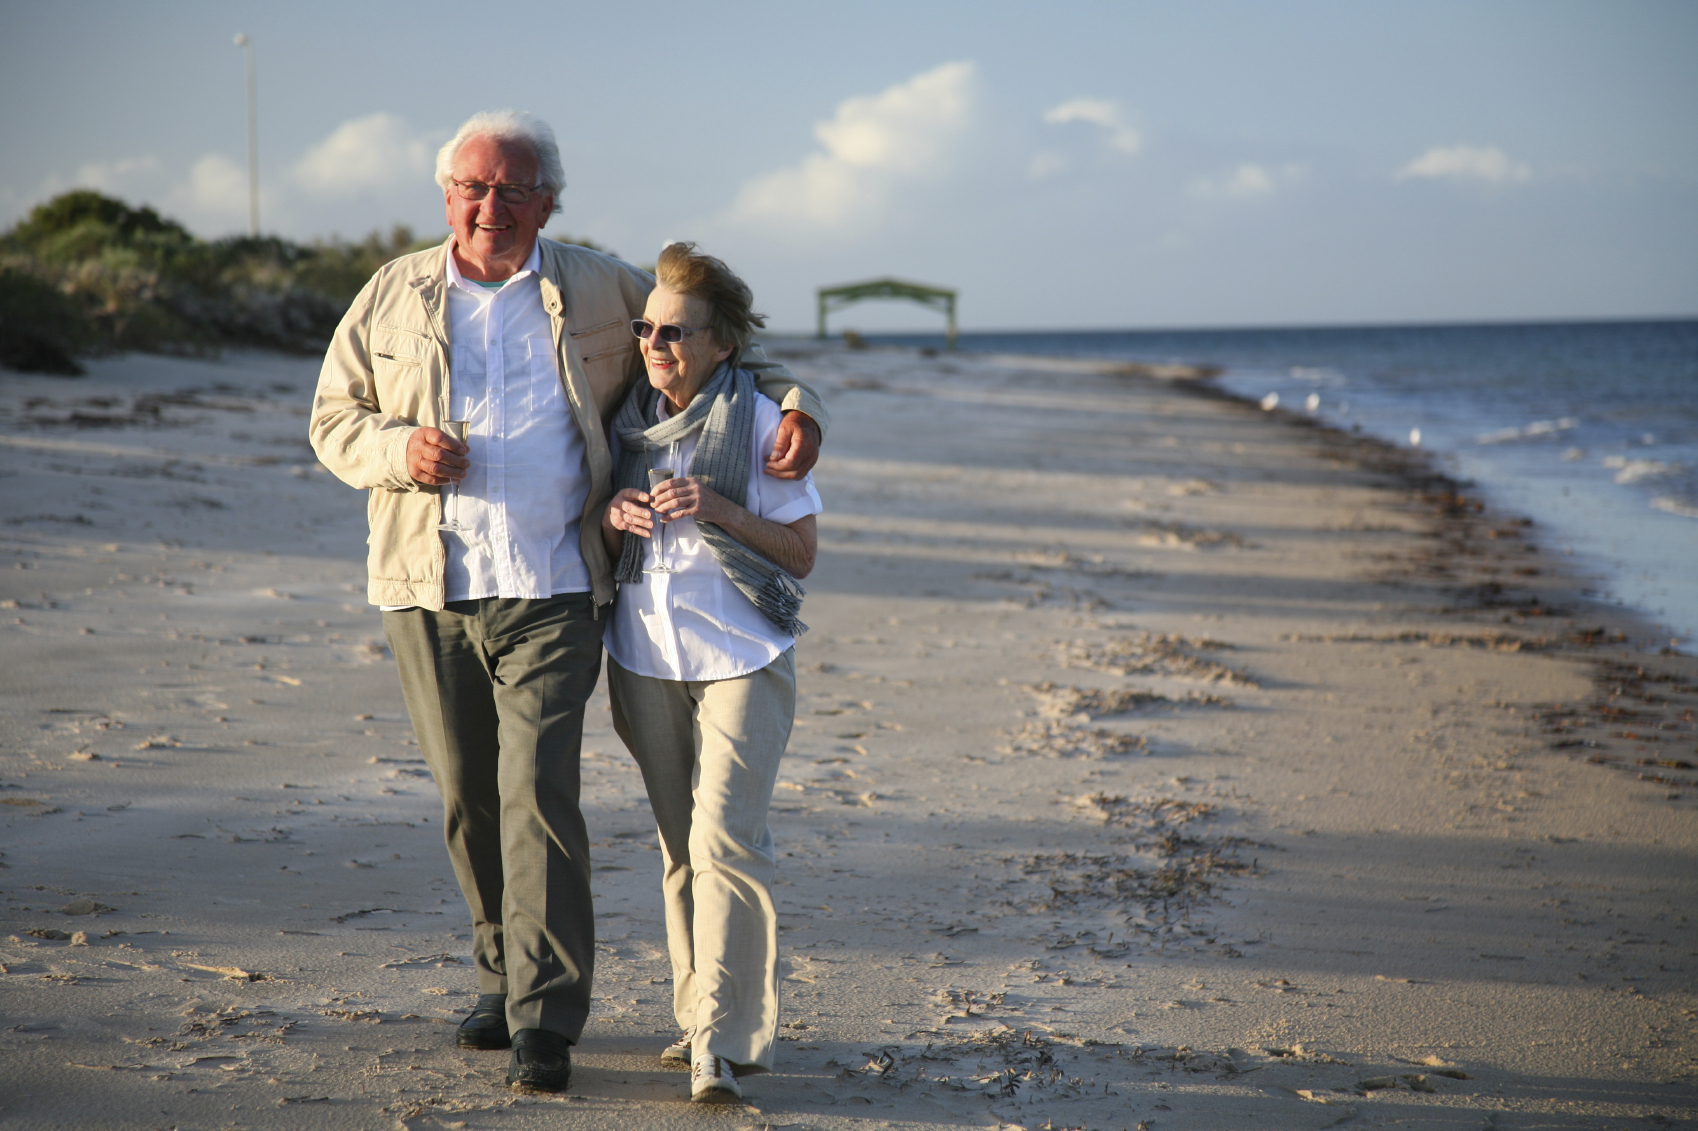 The seaside town of Duxbury is home to the retirement living community, The Village at Duxbury.